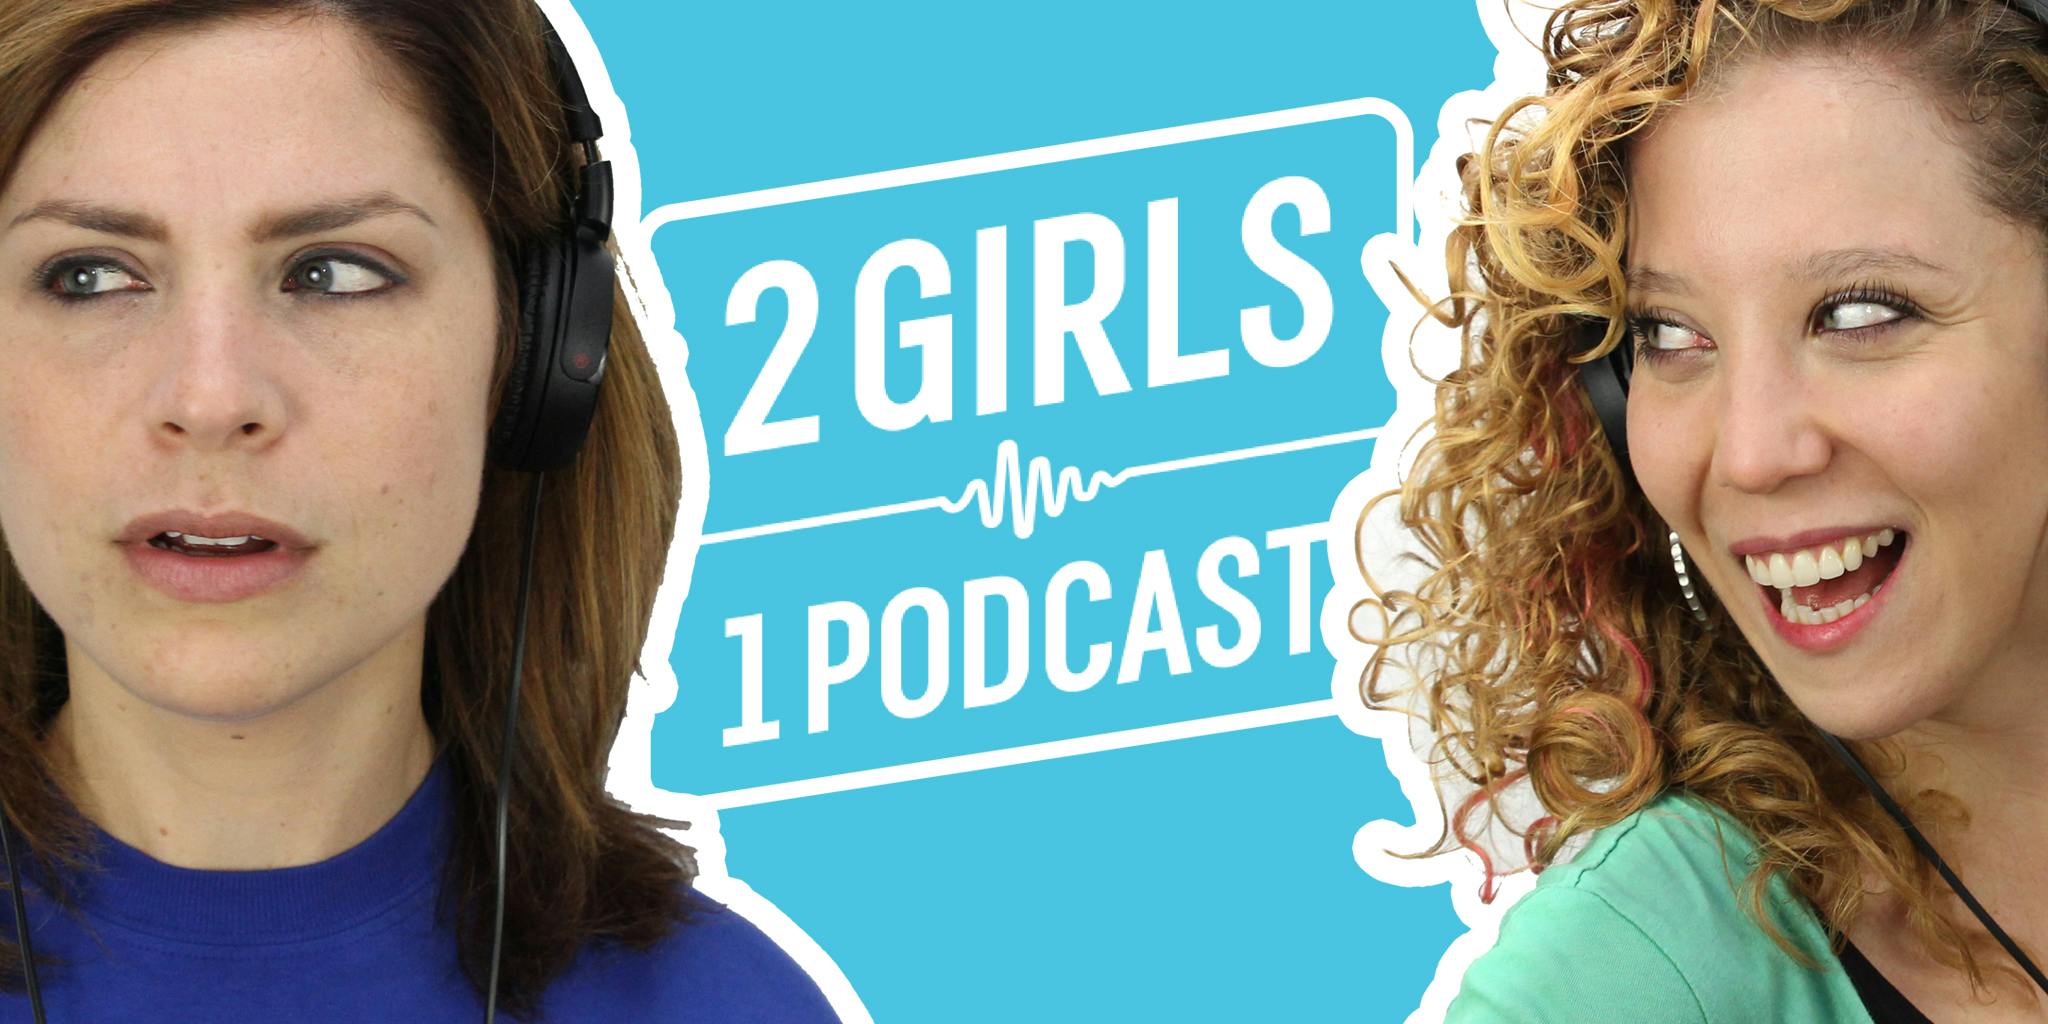 Wtf Is 2 Girls 1 Podcast The Daily Dot